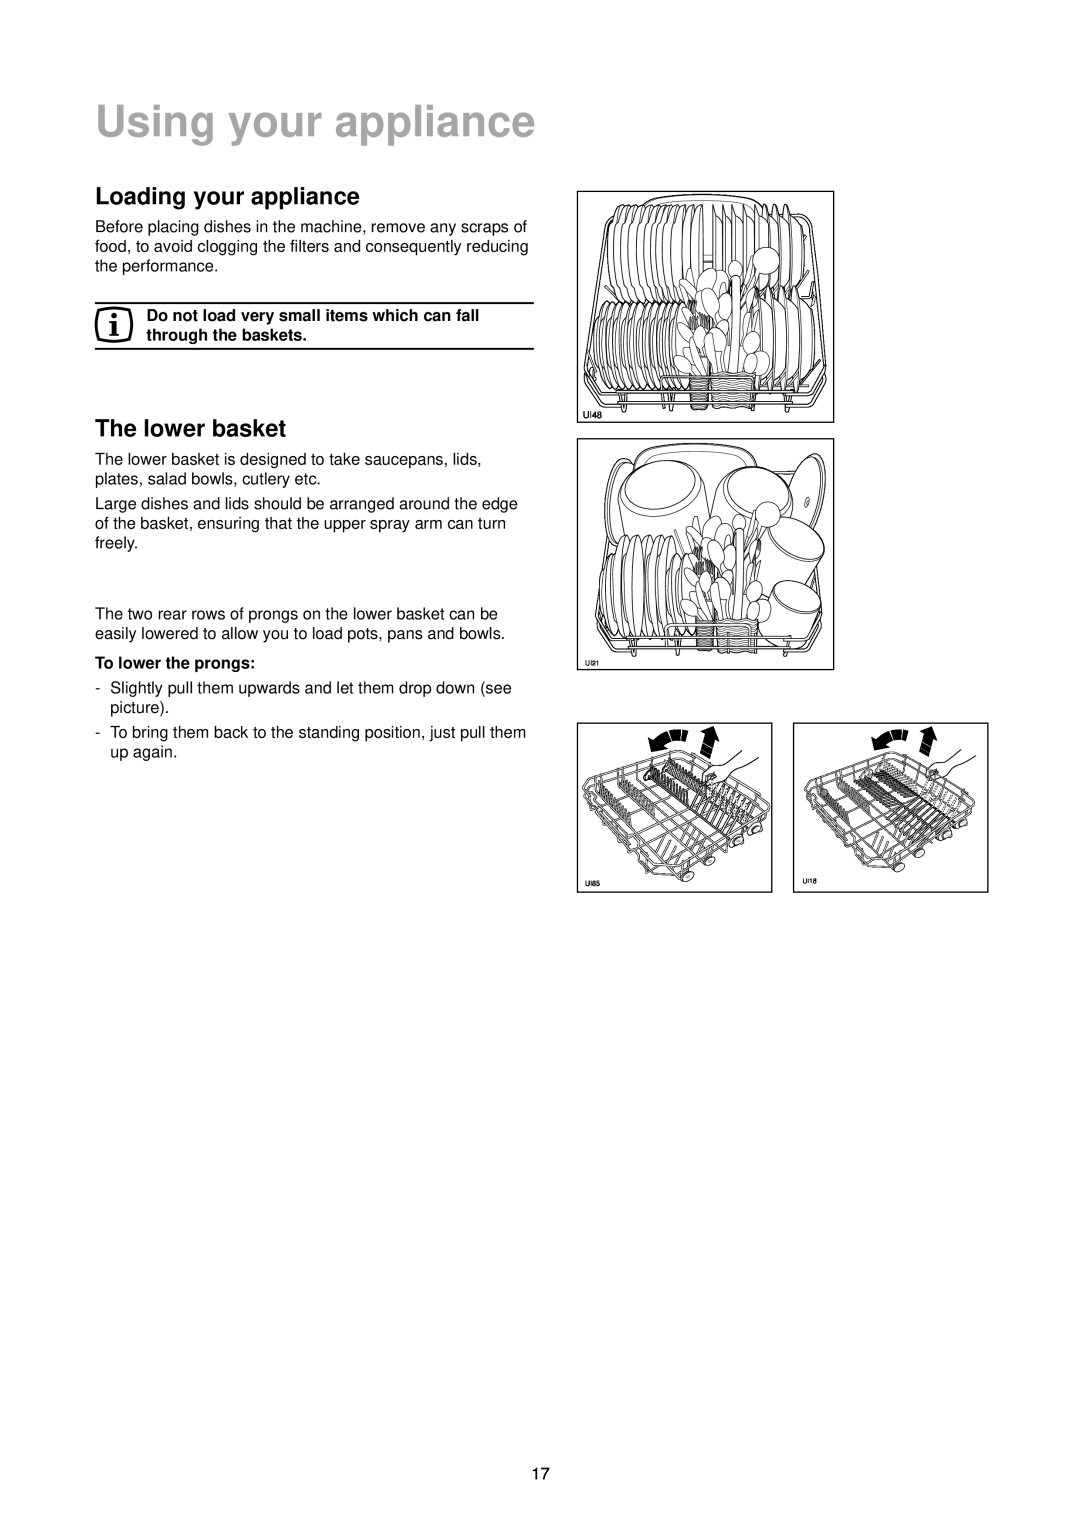 Zanussi DA 6473 manual Using your appliance, Loading your appliance, The lower basket 